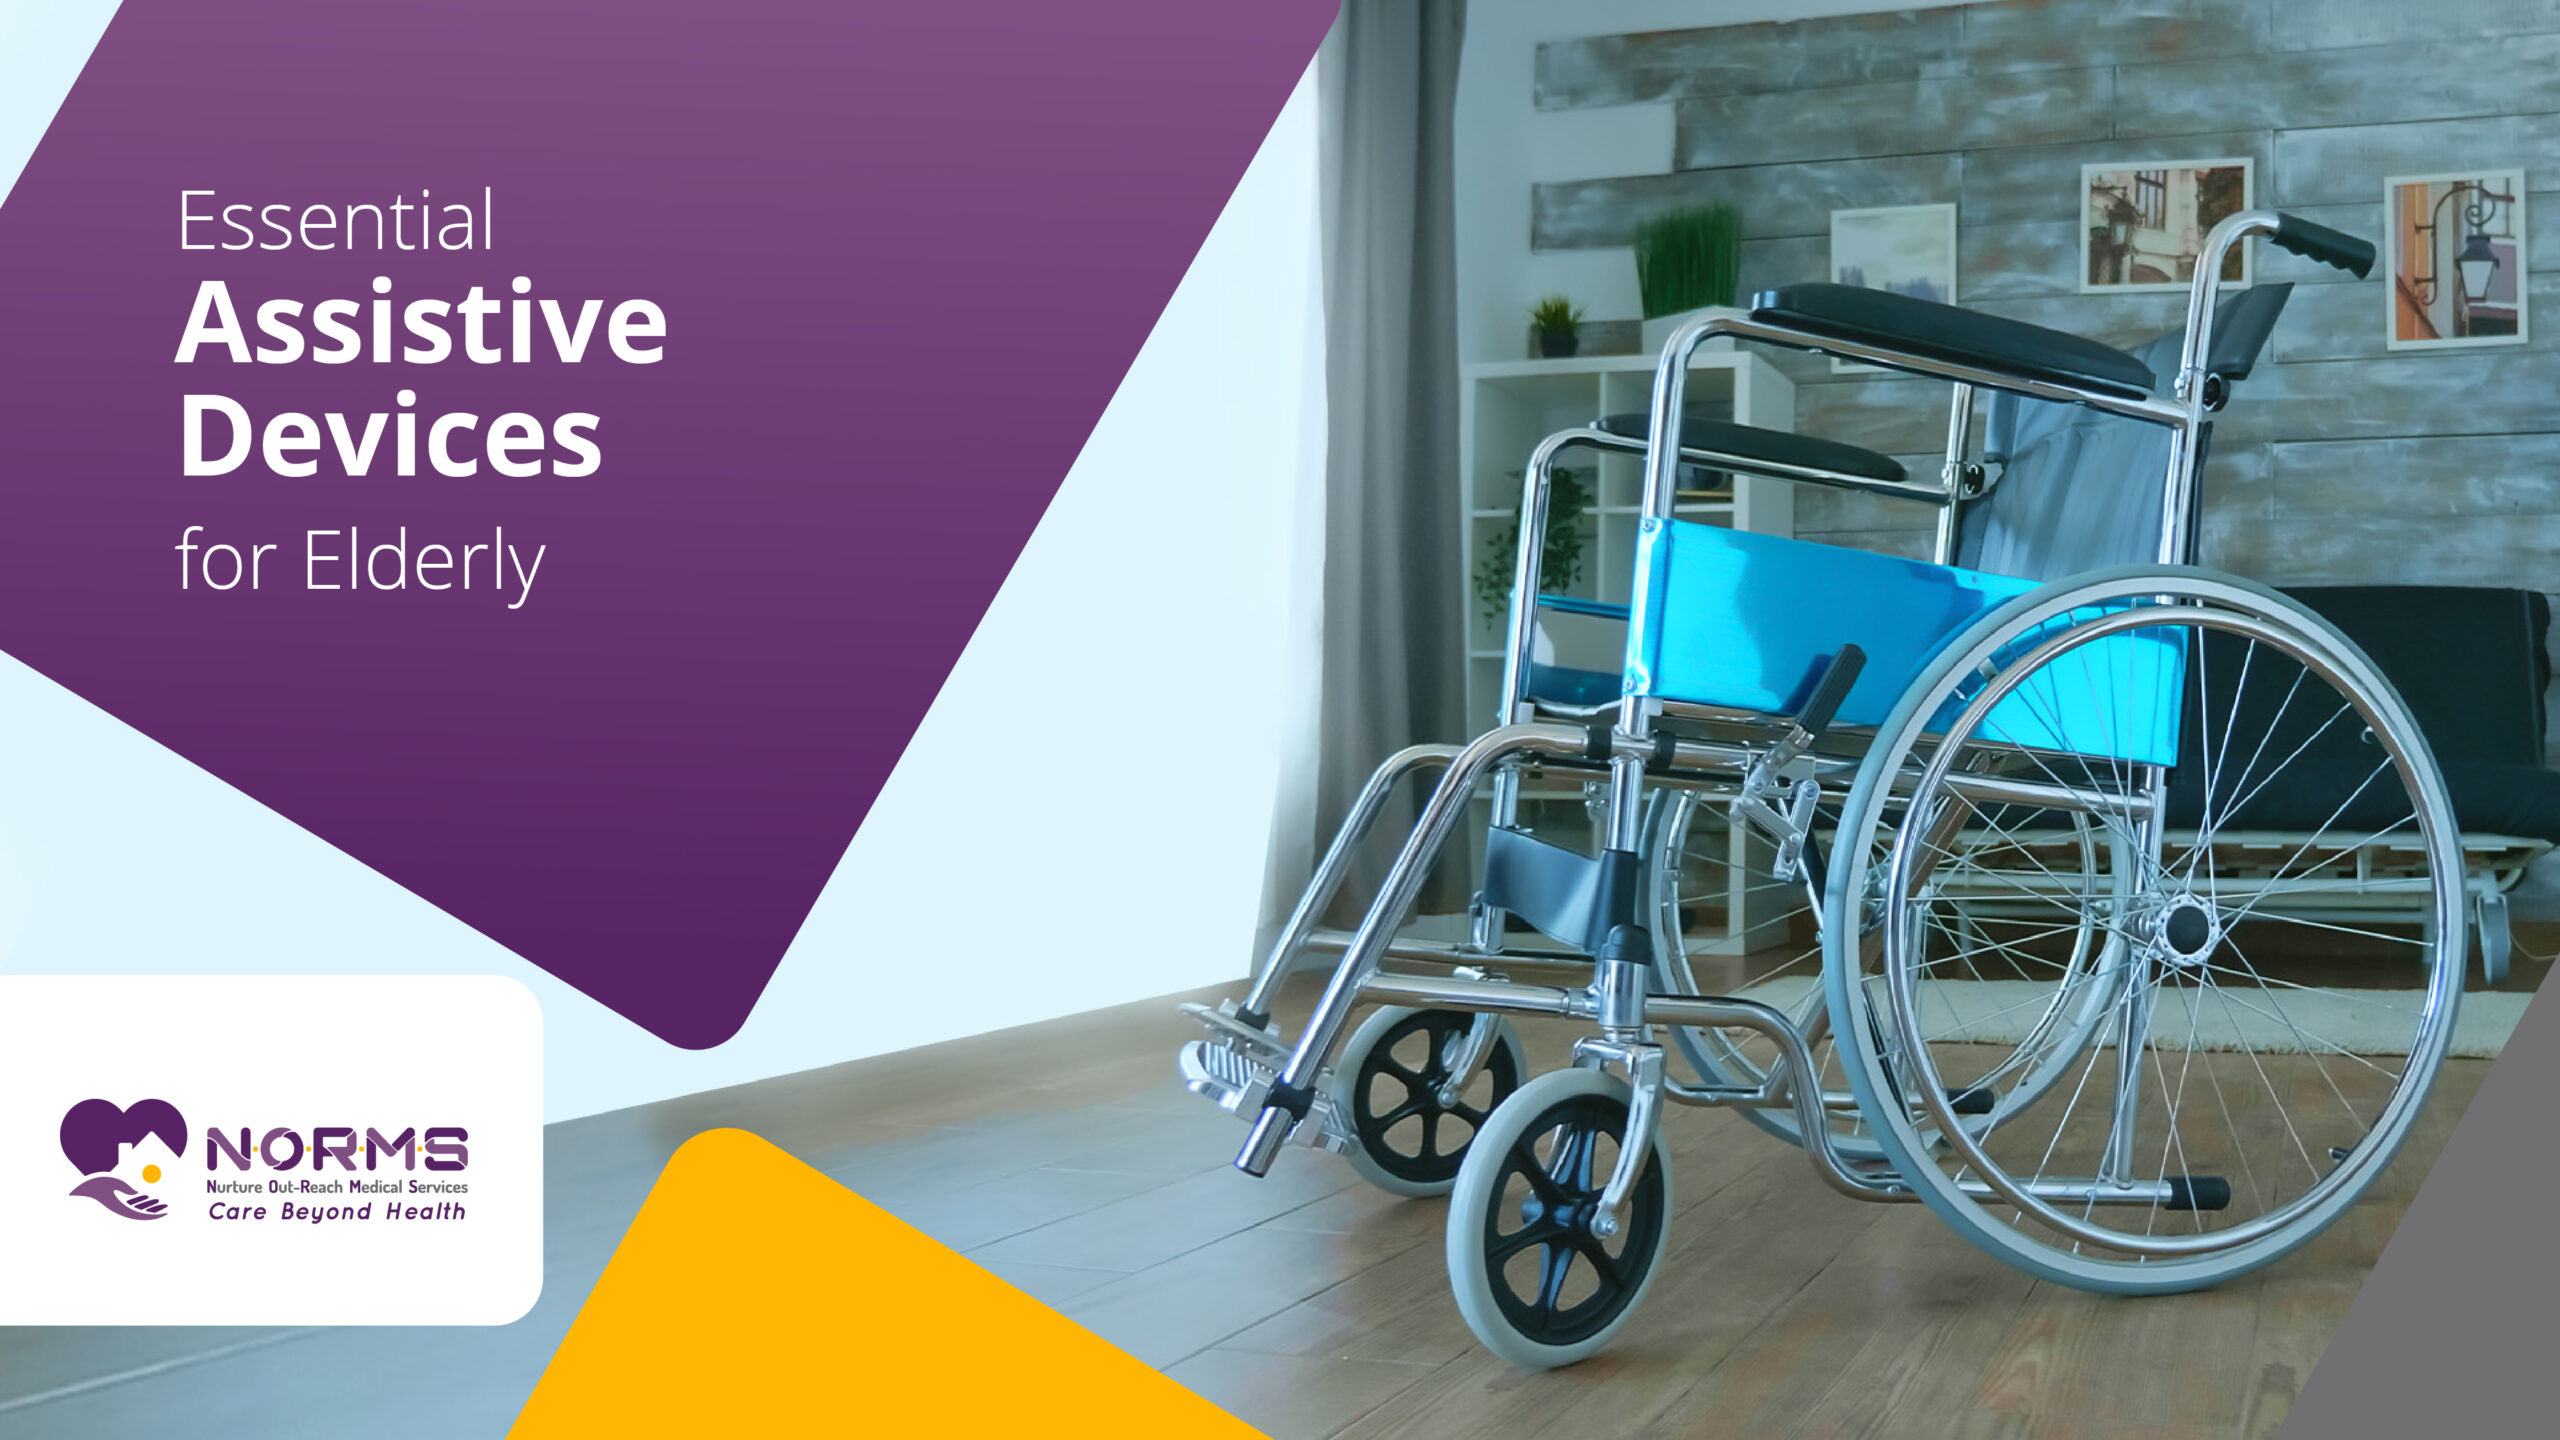 Essential Assistive Devices for Elderly people